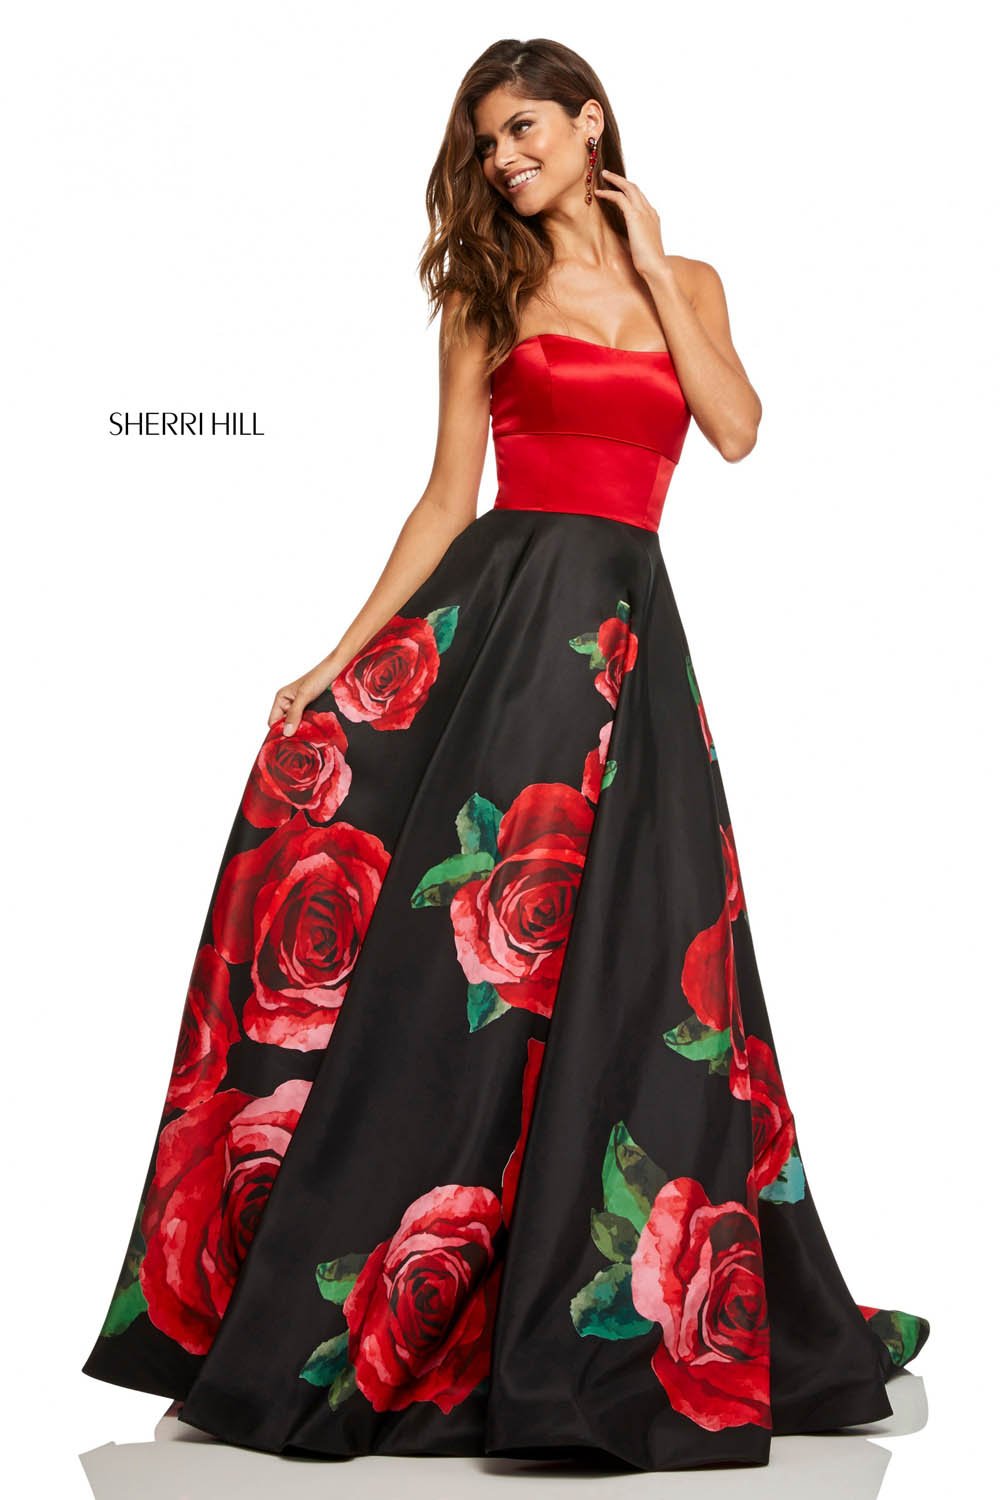 Sherri Hill 52722 dress images in these colors: Black Red Print, Ivory Red Print, Black Print.